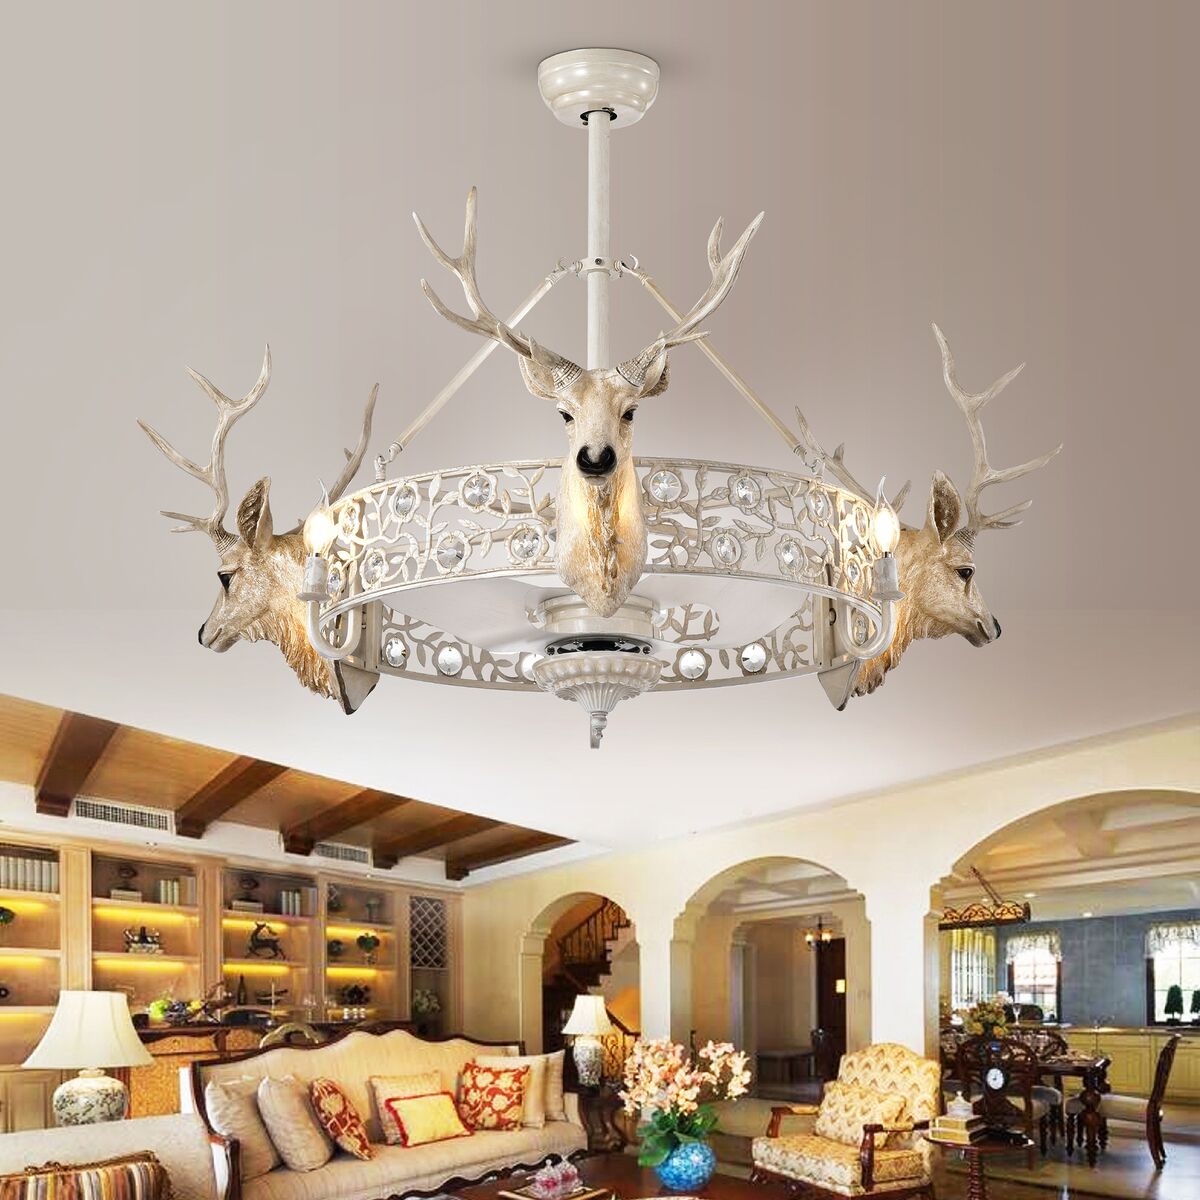 Deer Head Fandelier LED Lighted Ceiling Fan with Remote Control (includes bulbs)